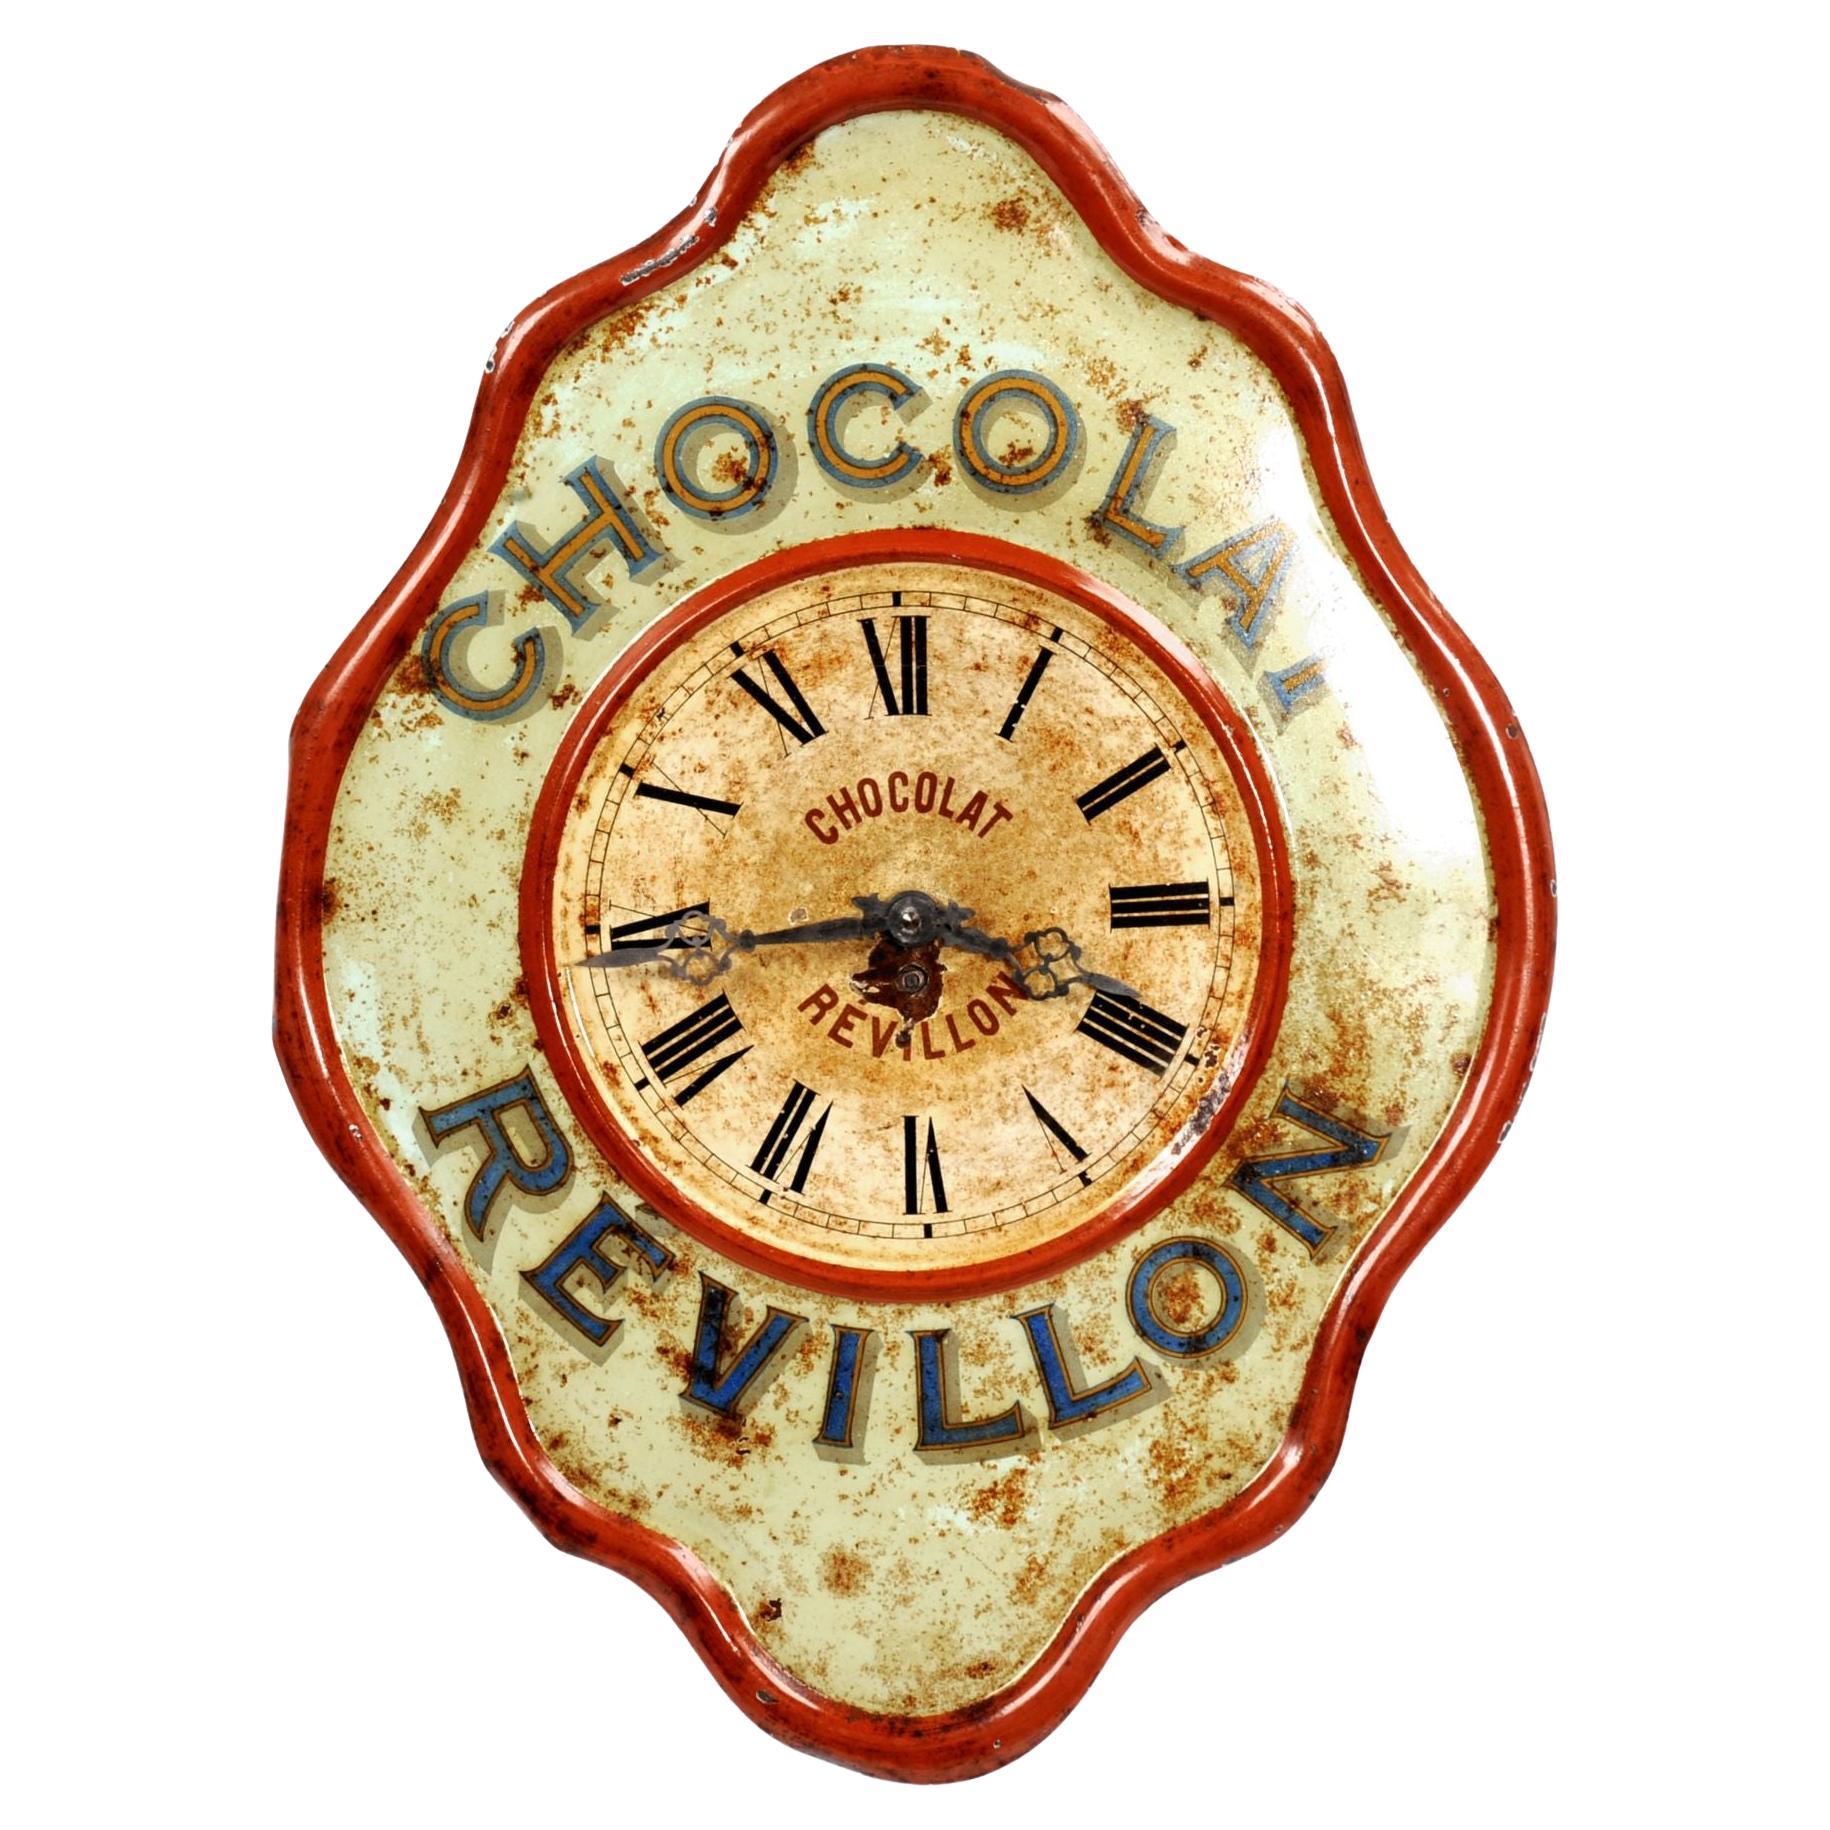 Original French Revillon Chocolate Advertising Wall Clock, Fully Working For Sale